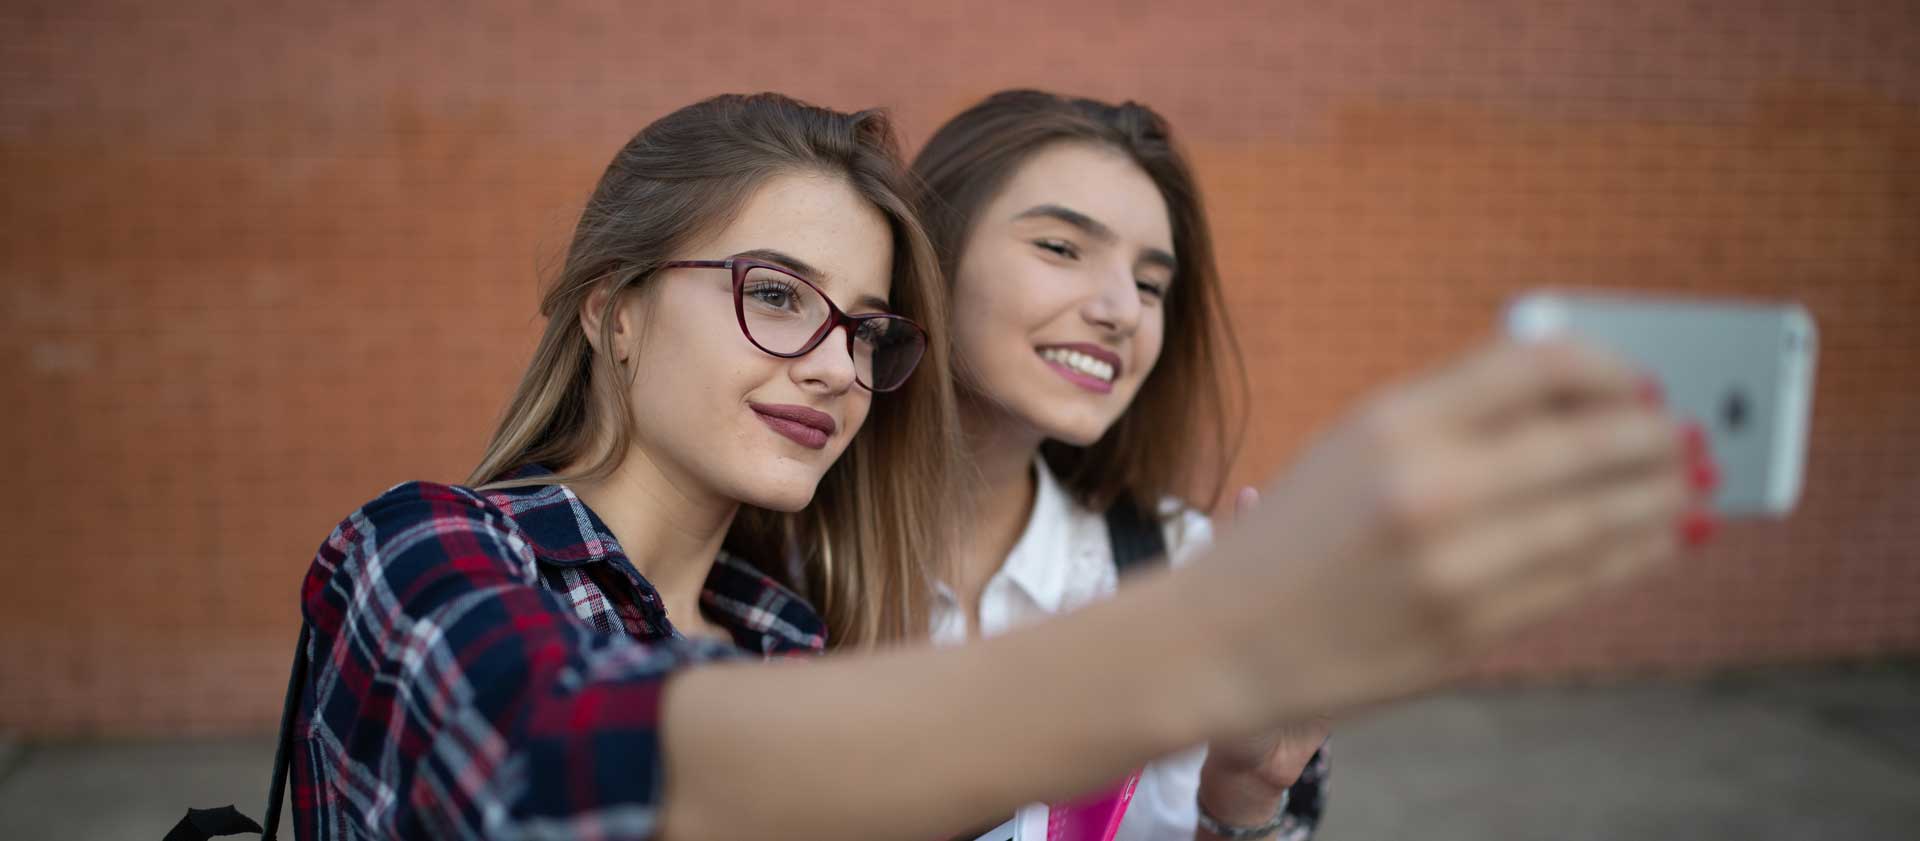 A teenage girl is taking a selfie with her friend